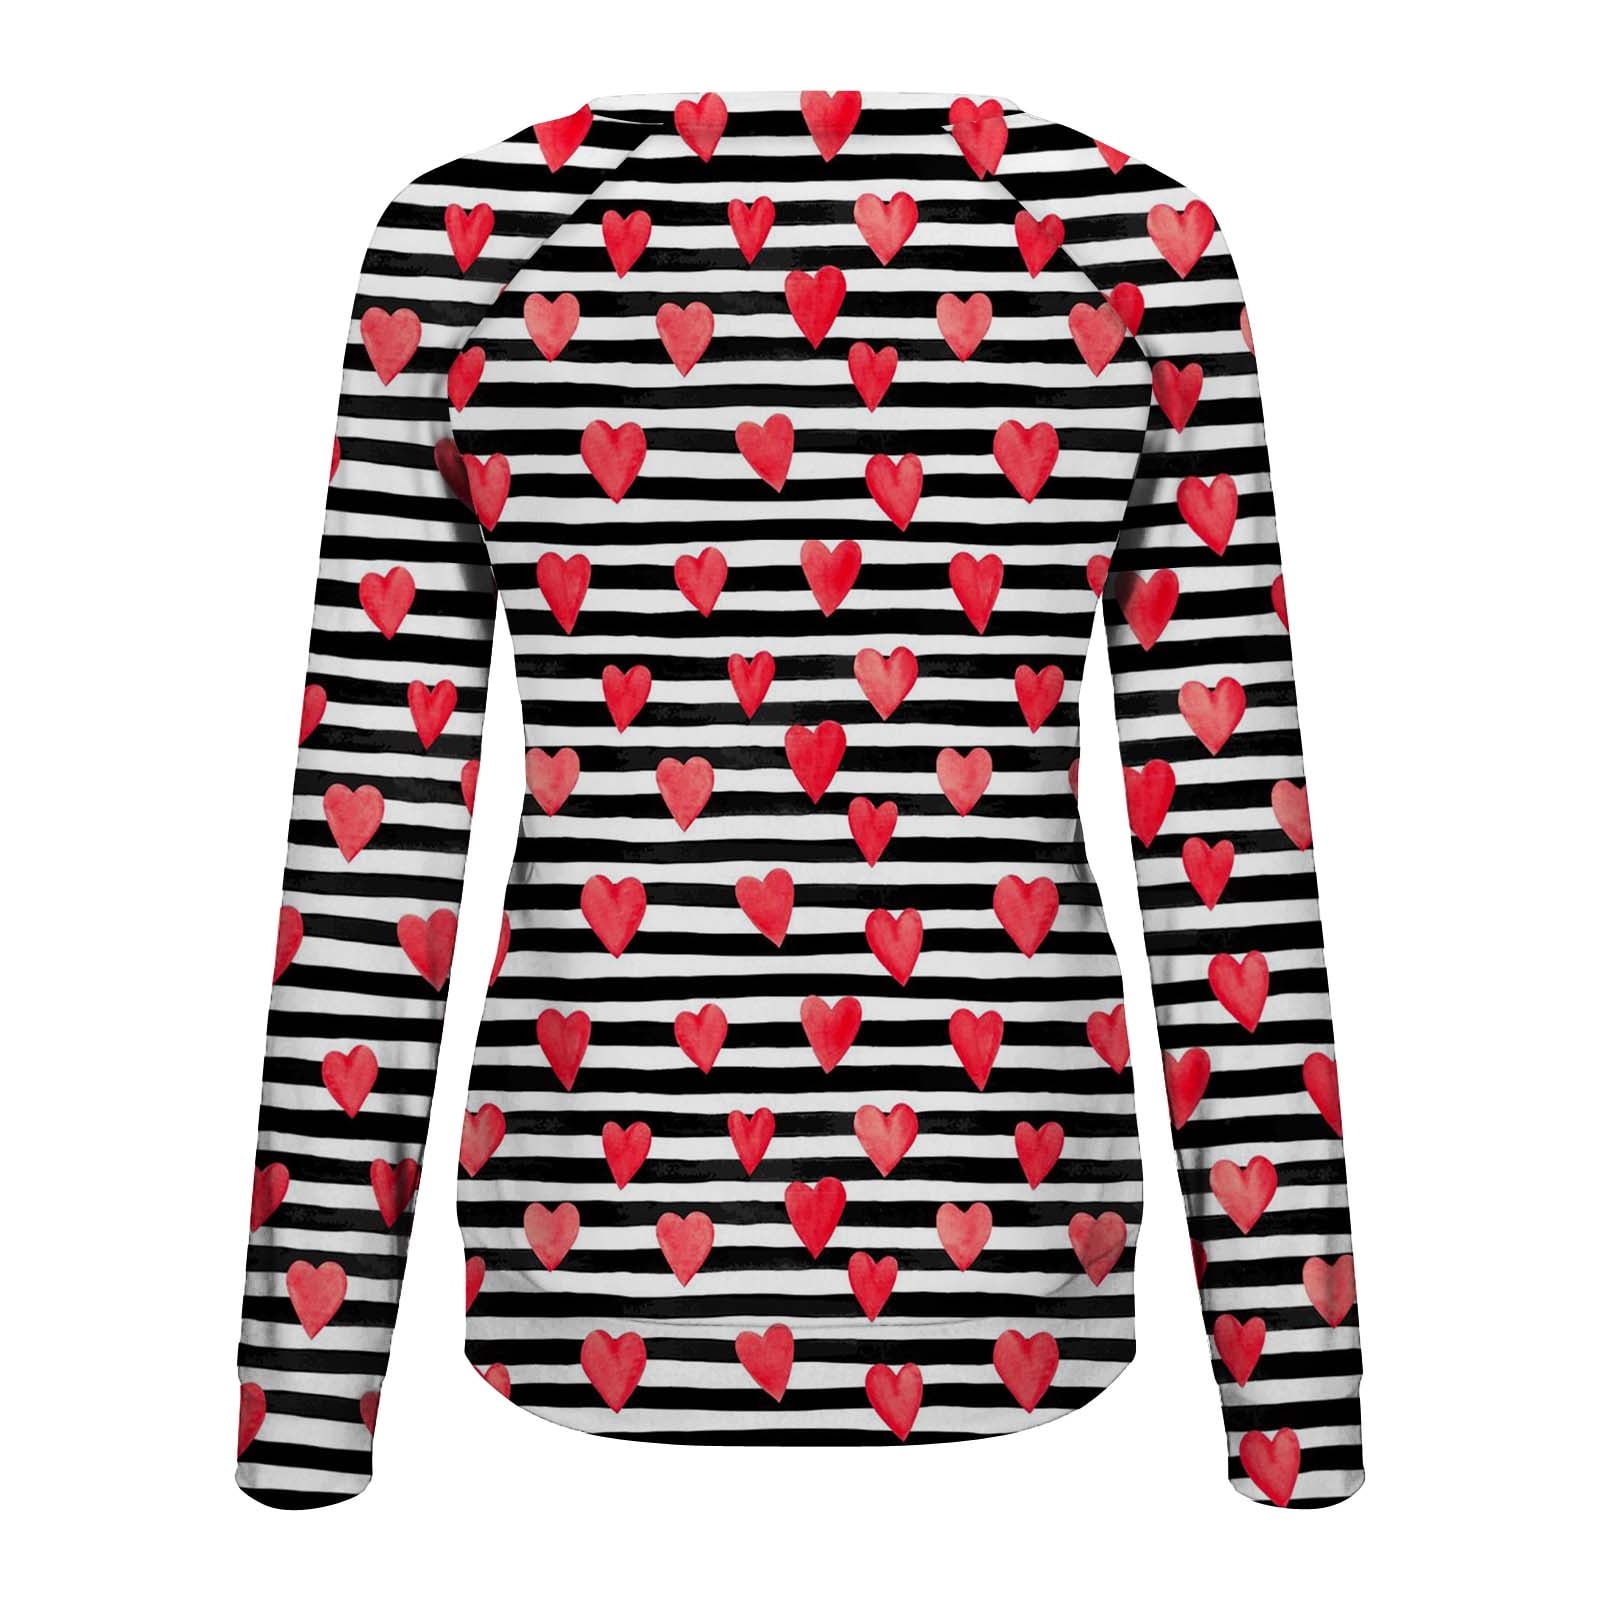 Sleeve Happy Stripe Crewneck Shirts Long Day Loose Heart RQYYD XL Graphic Sweatshirt Valentine\'s Pullover Love Red Casual Tops Women